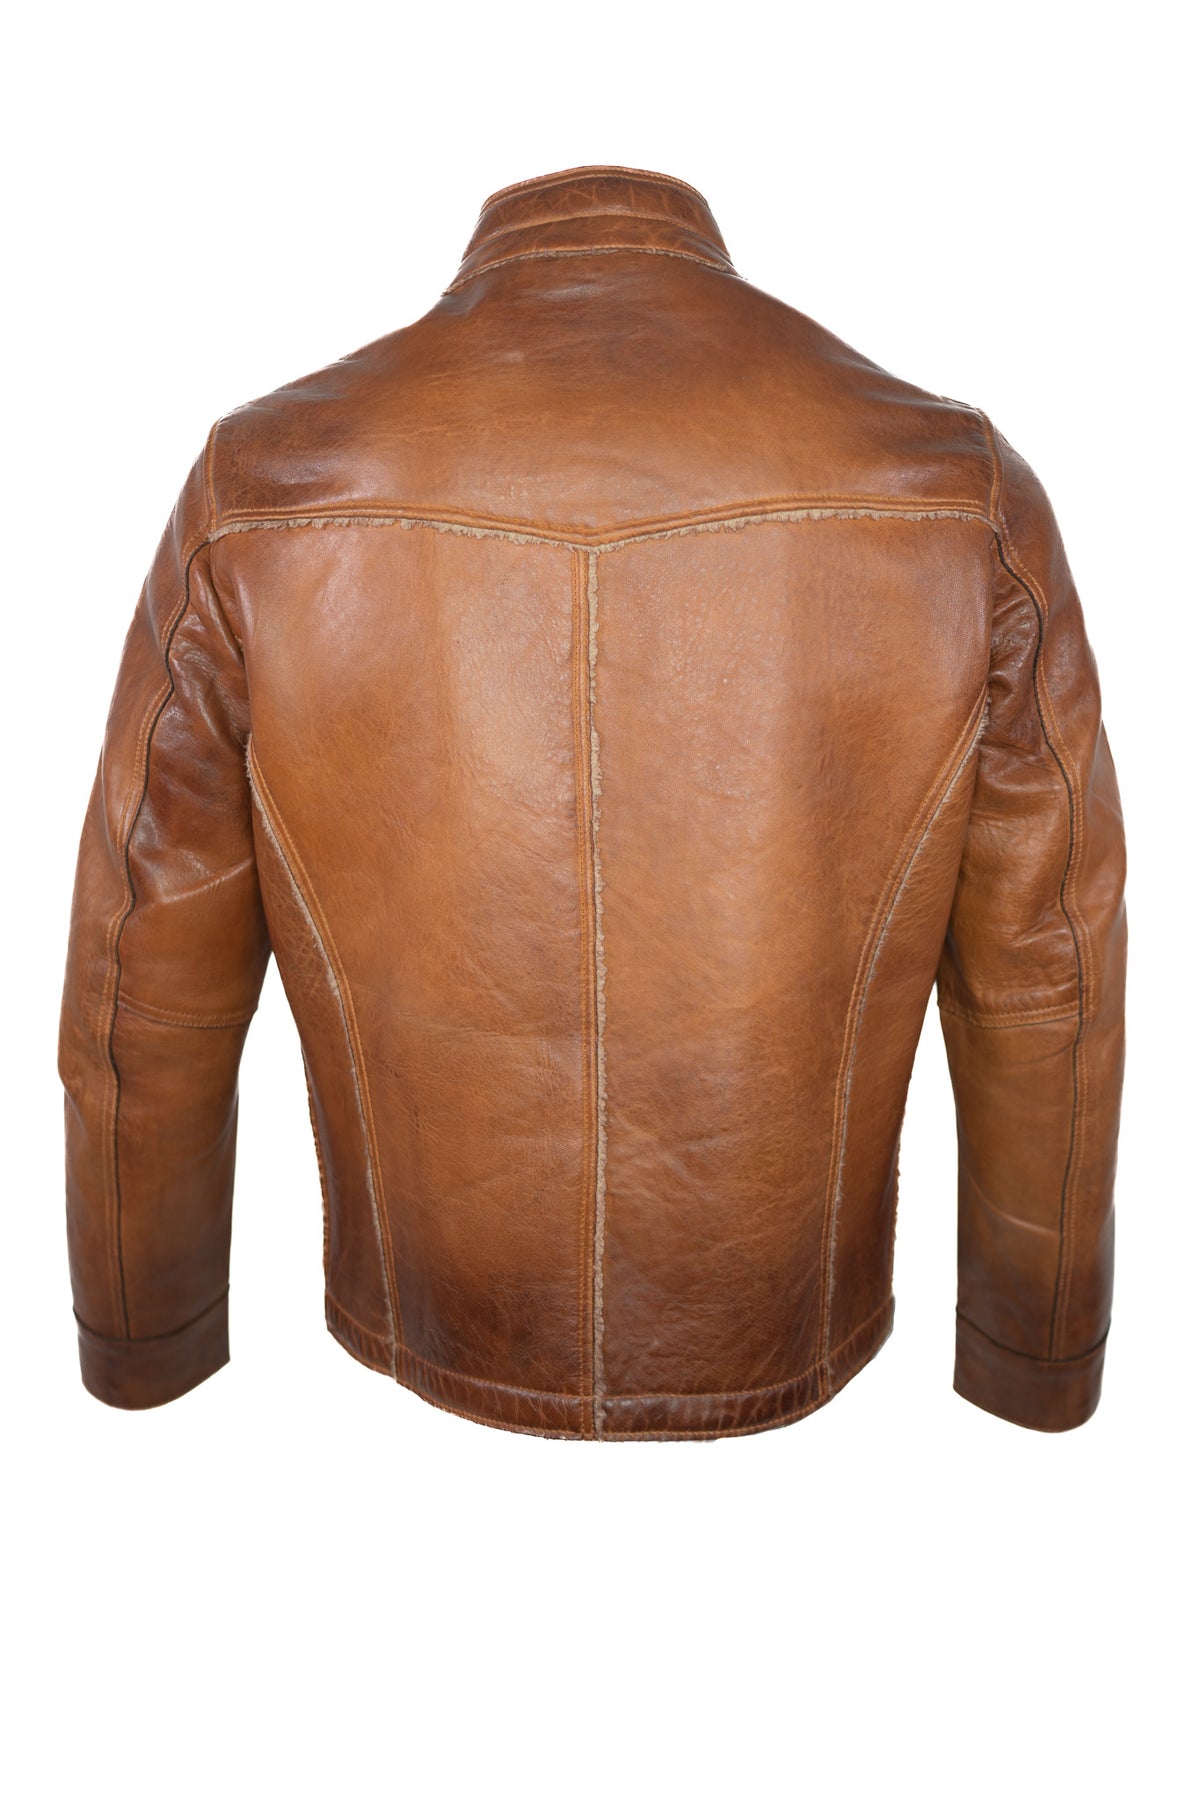 Scully Fleece-Lined Leather Jacket